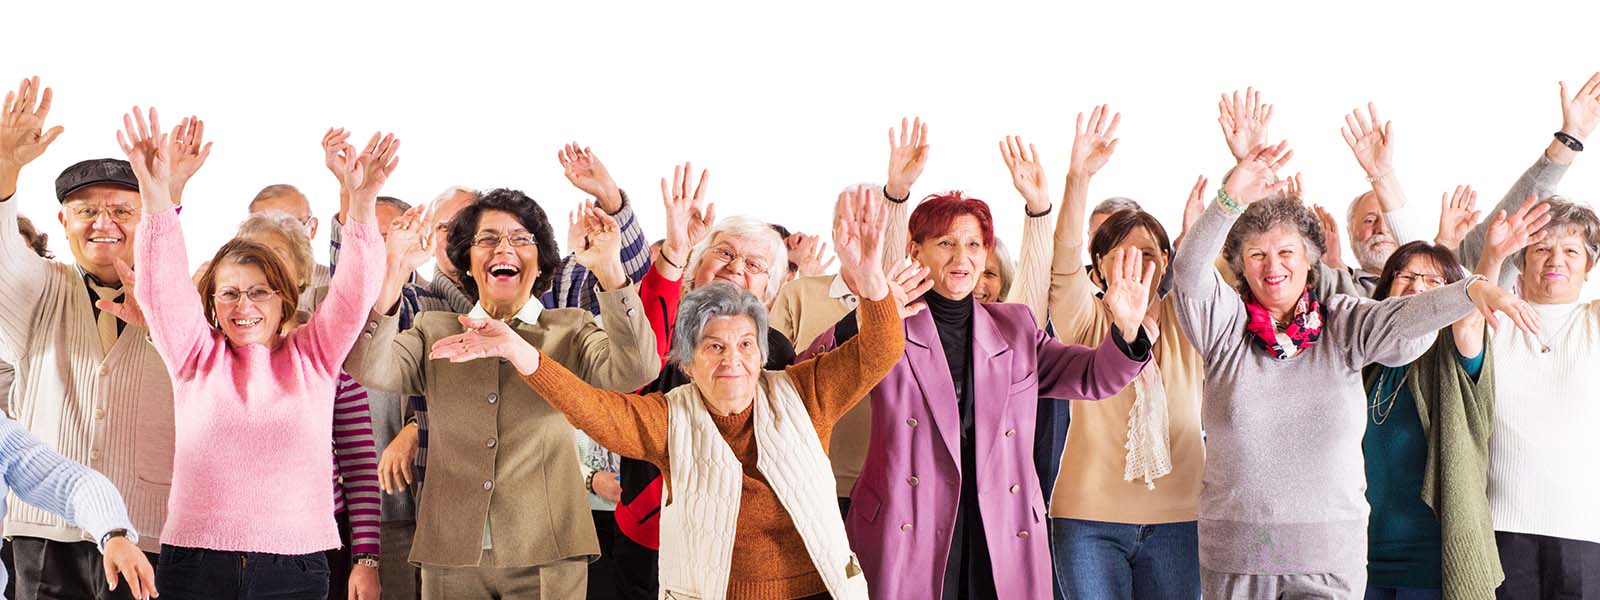 Large group of cheerful seniors with their hands raised